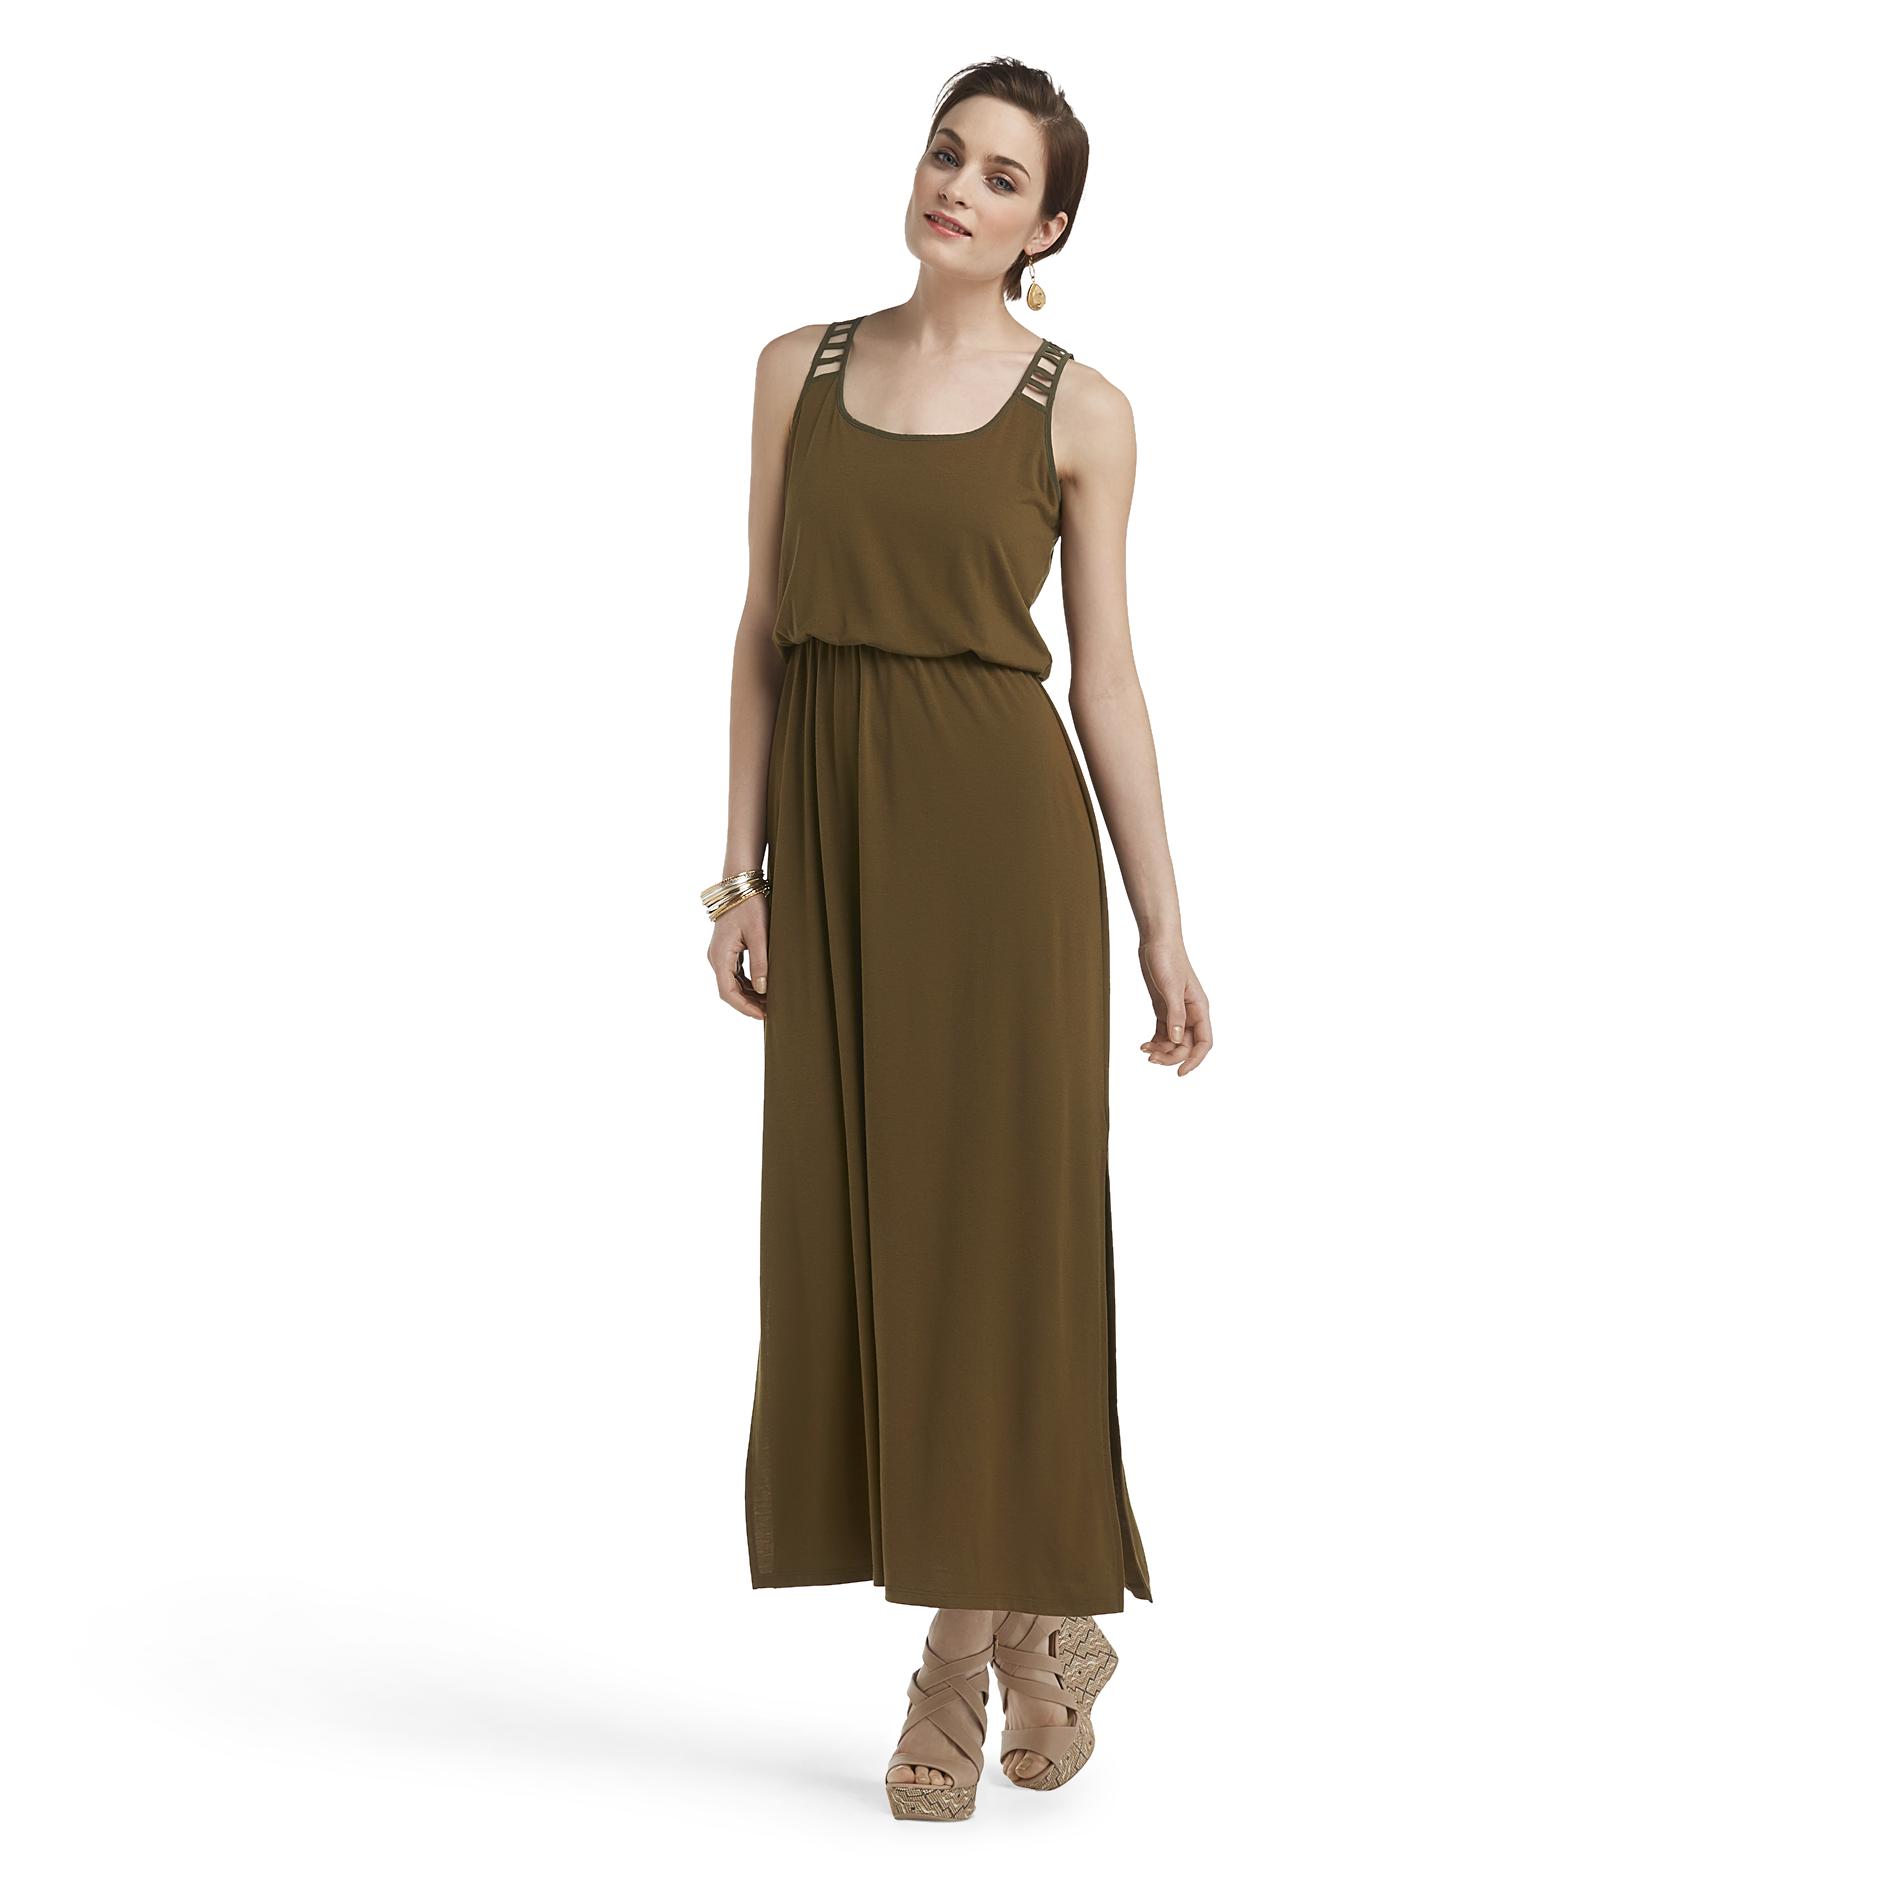 Attention Women's Strappy Maxi Dress